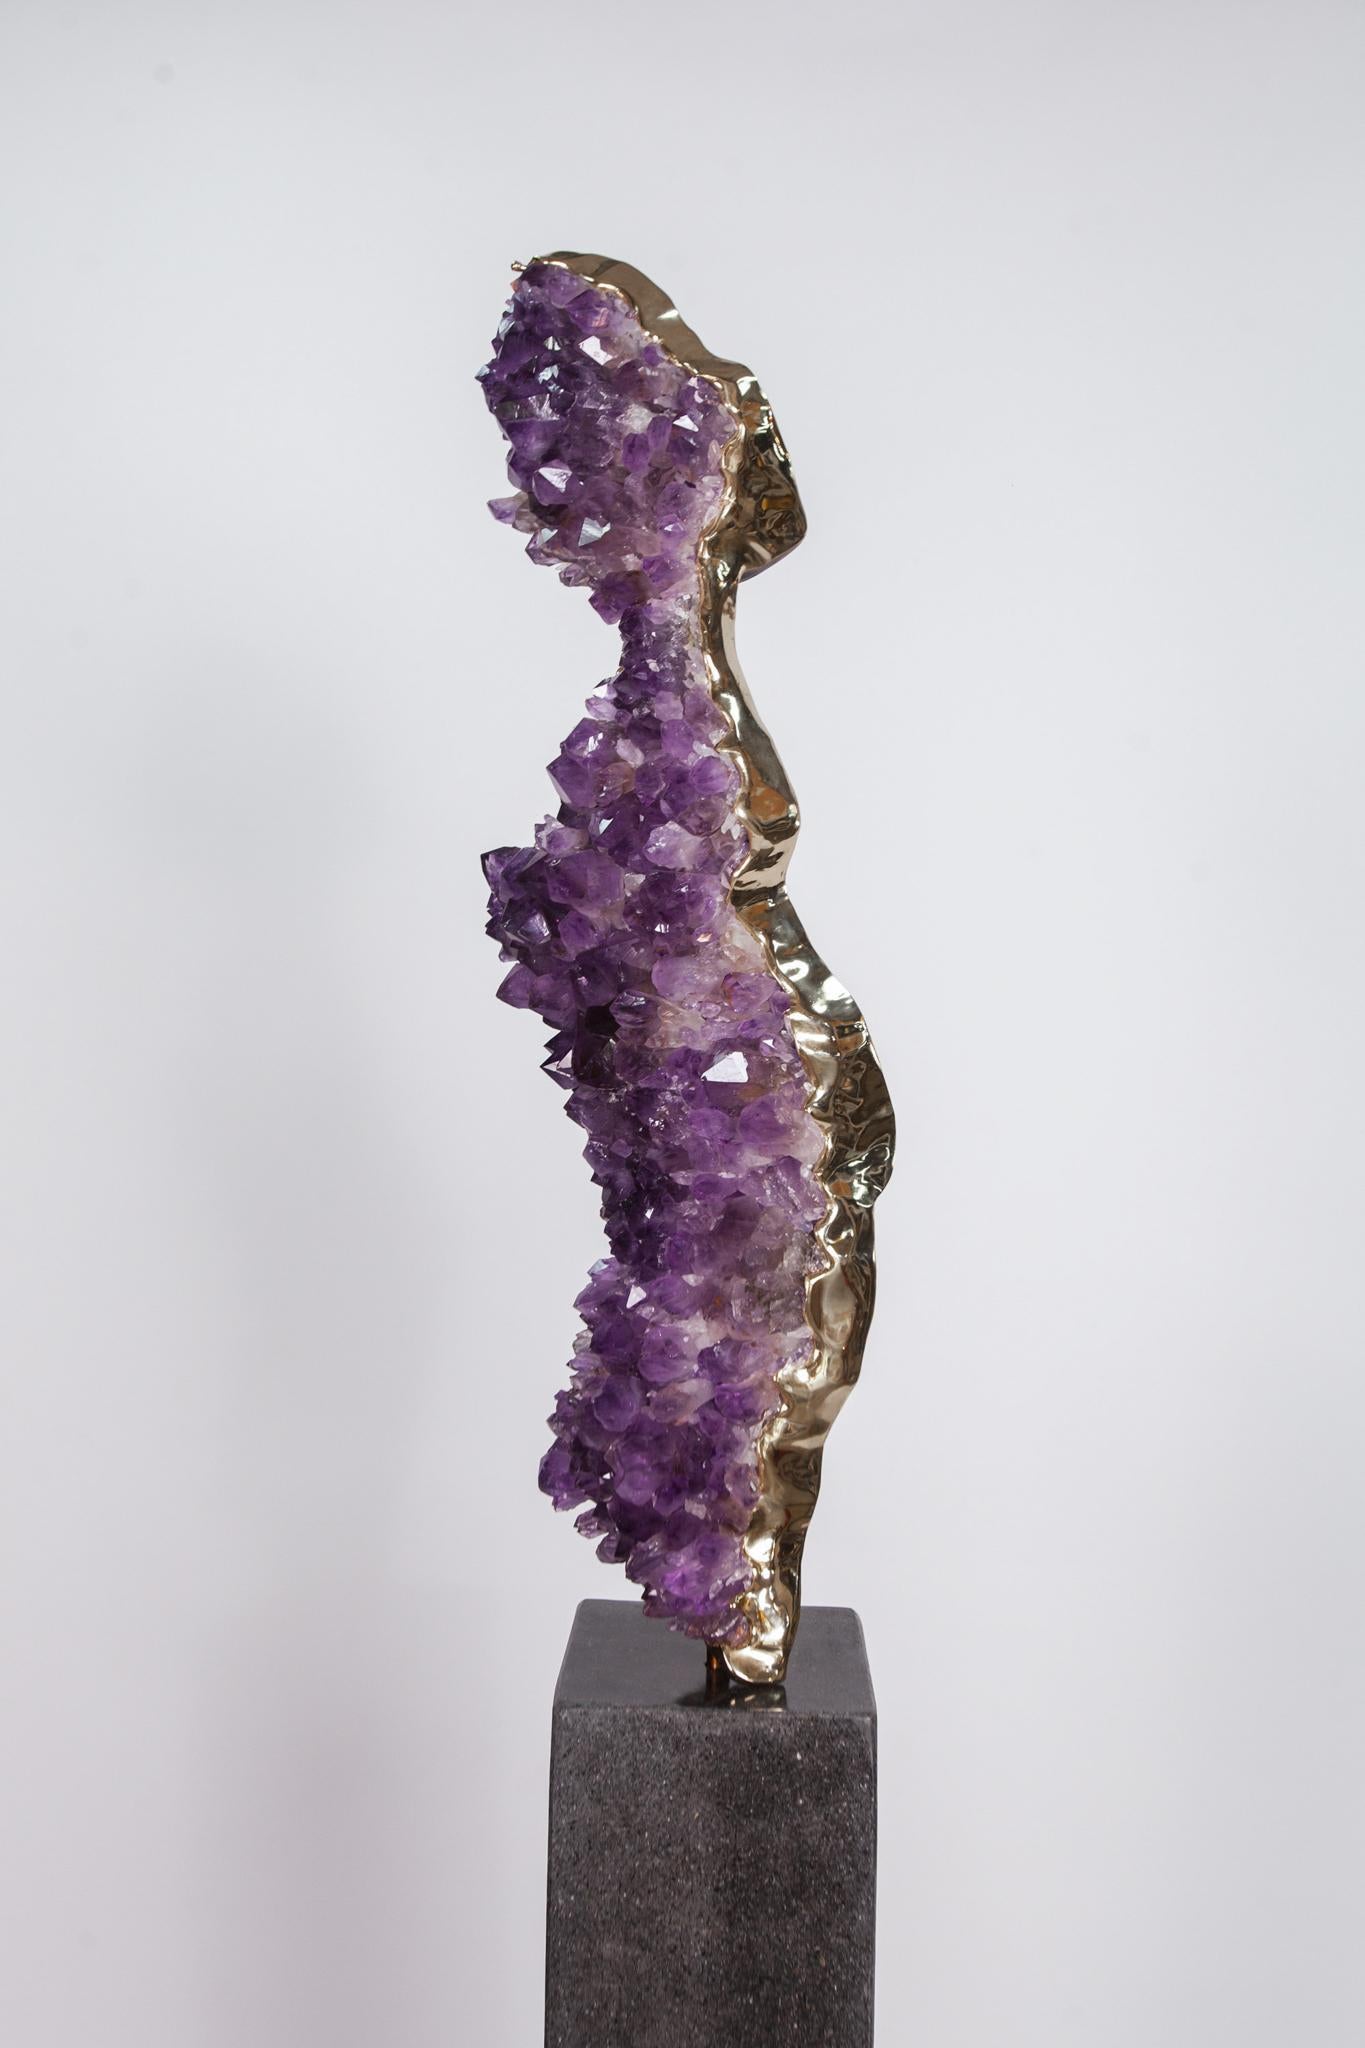 LIMINAL STATE  Amethyst crystals, bronze sculpture For Sale 8